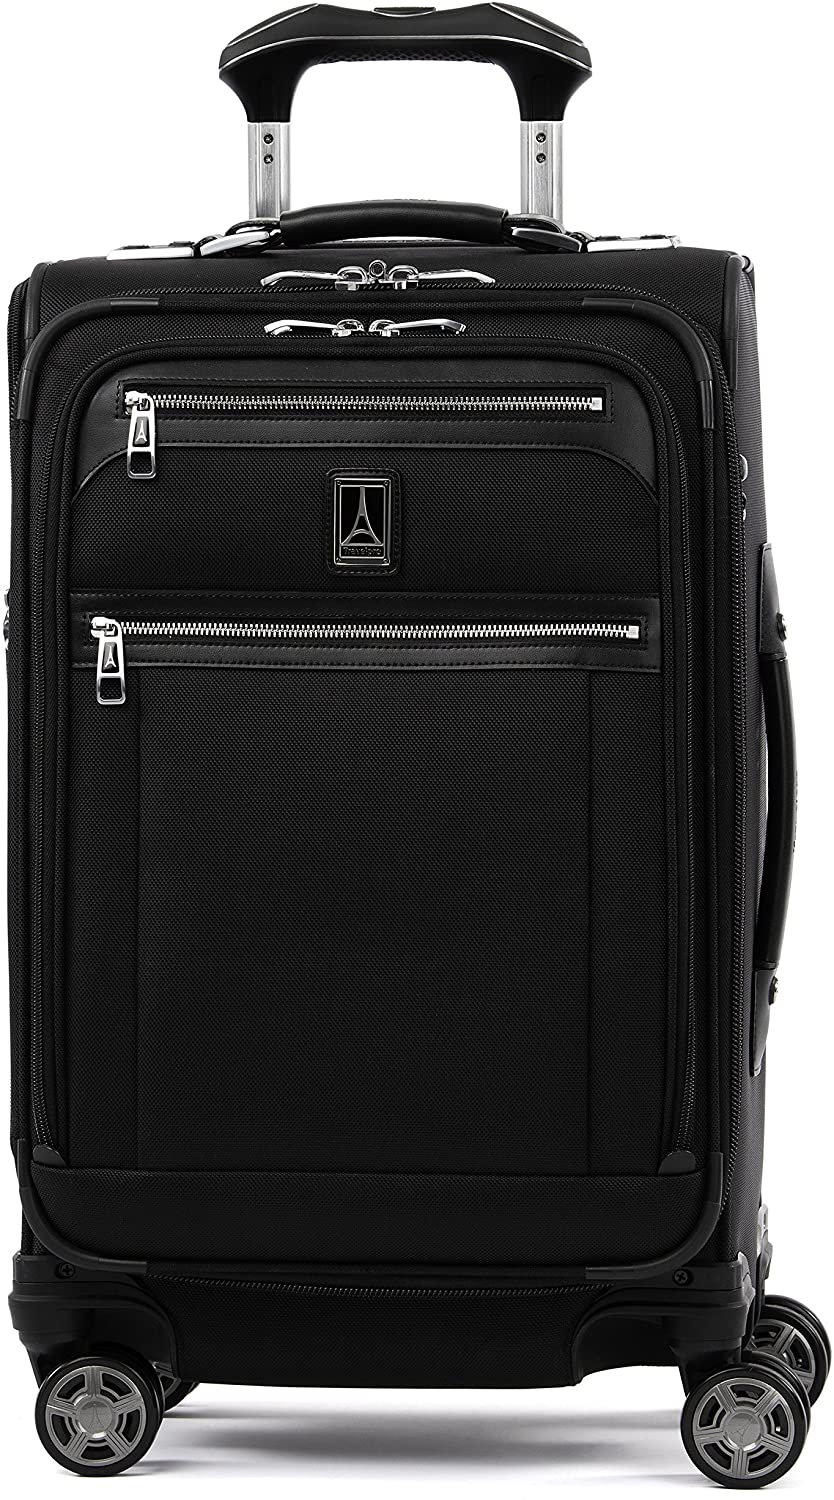 Travelpro Platinum Elite Spinner Carry On Luggage Case